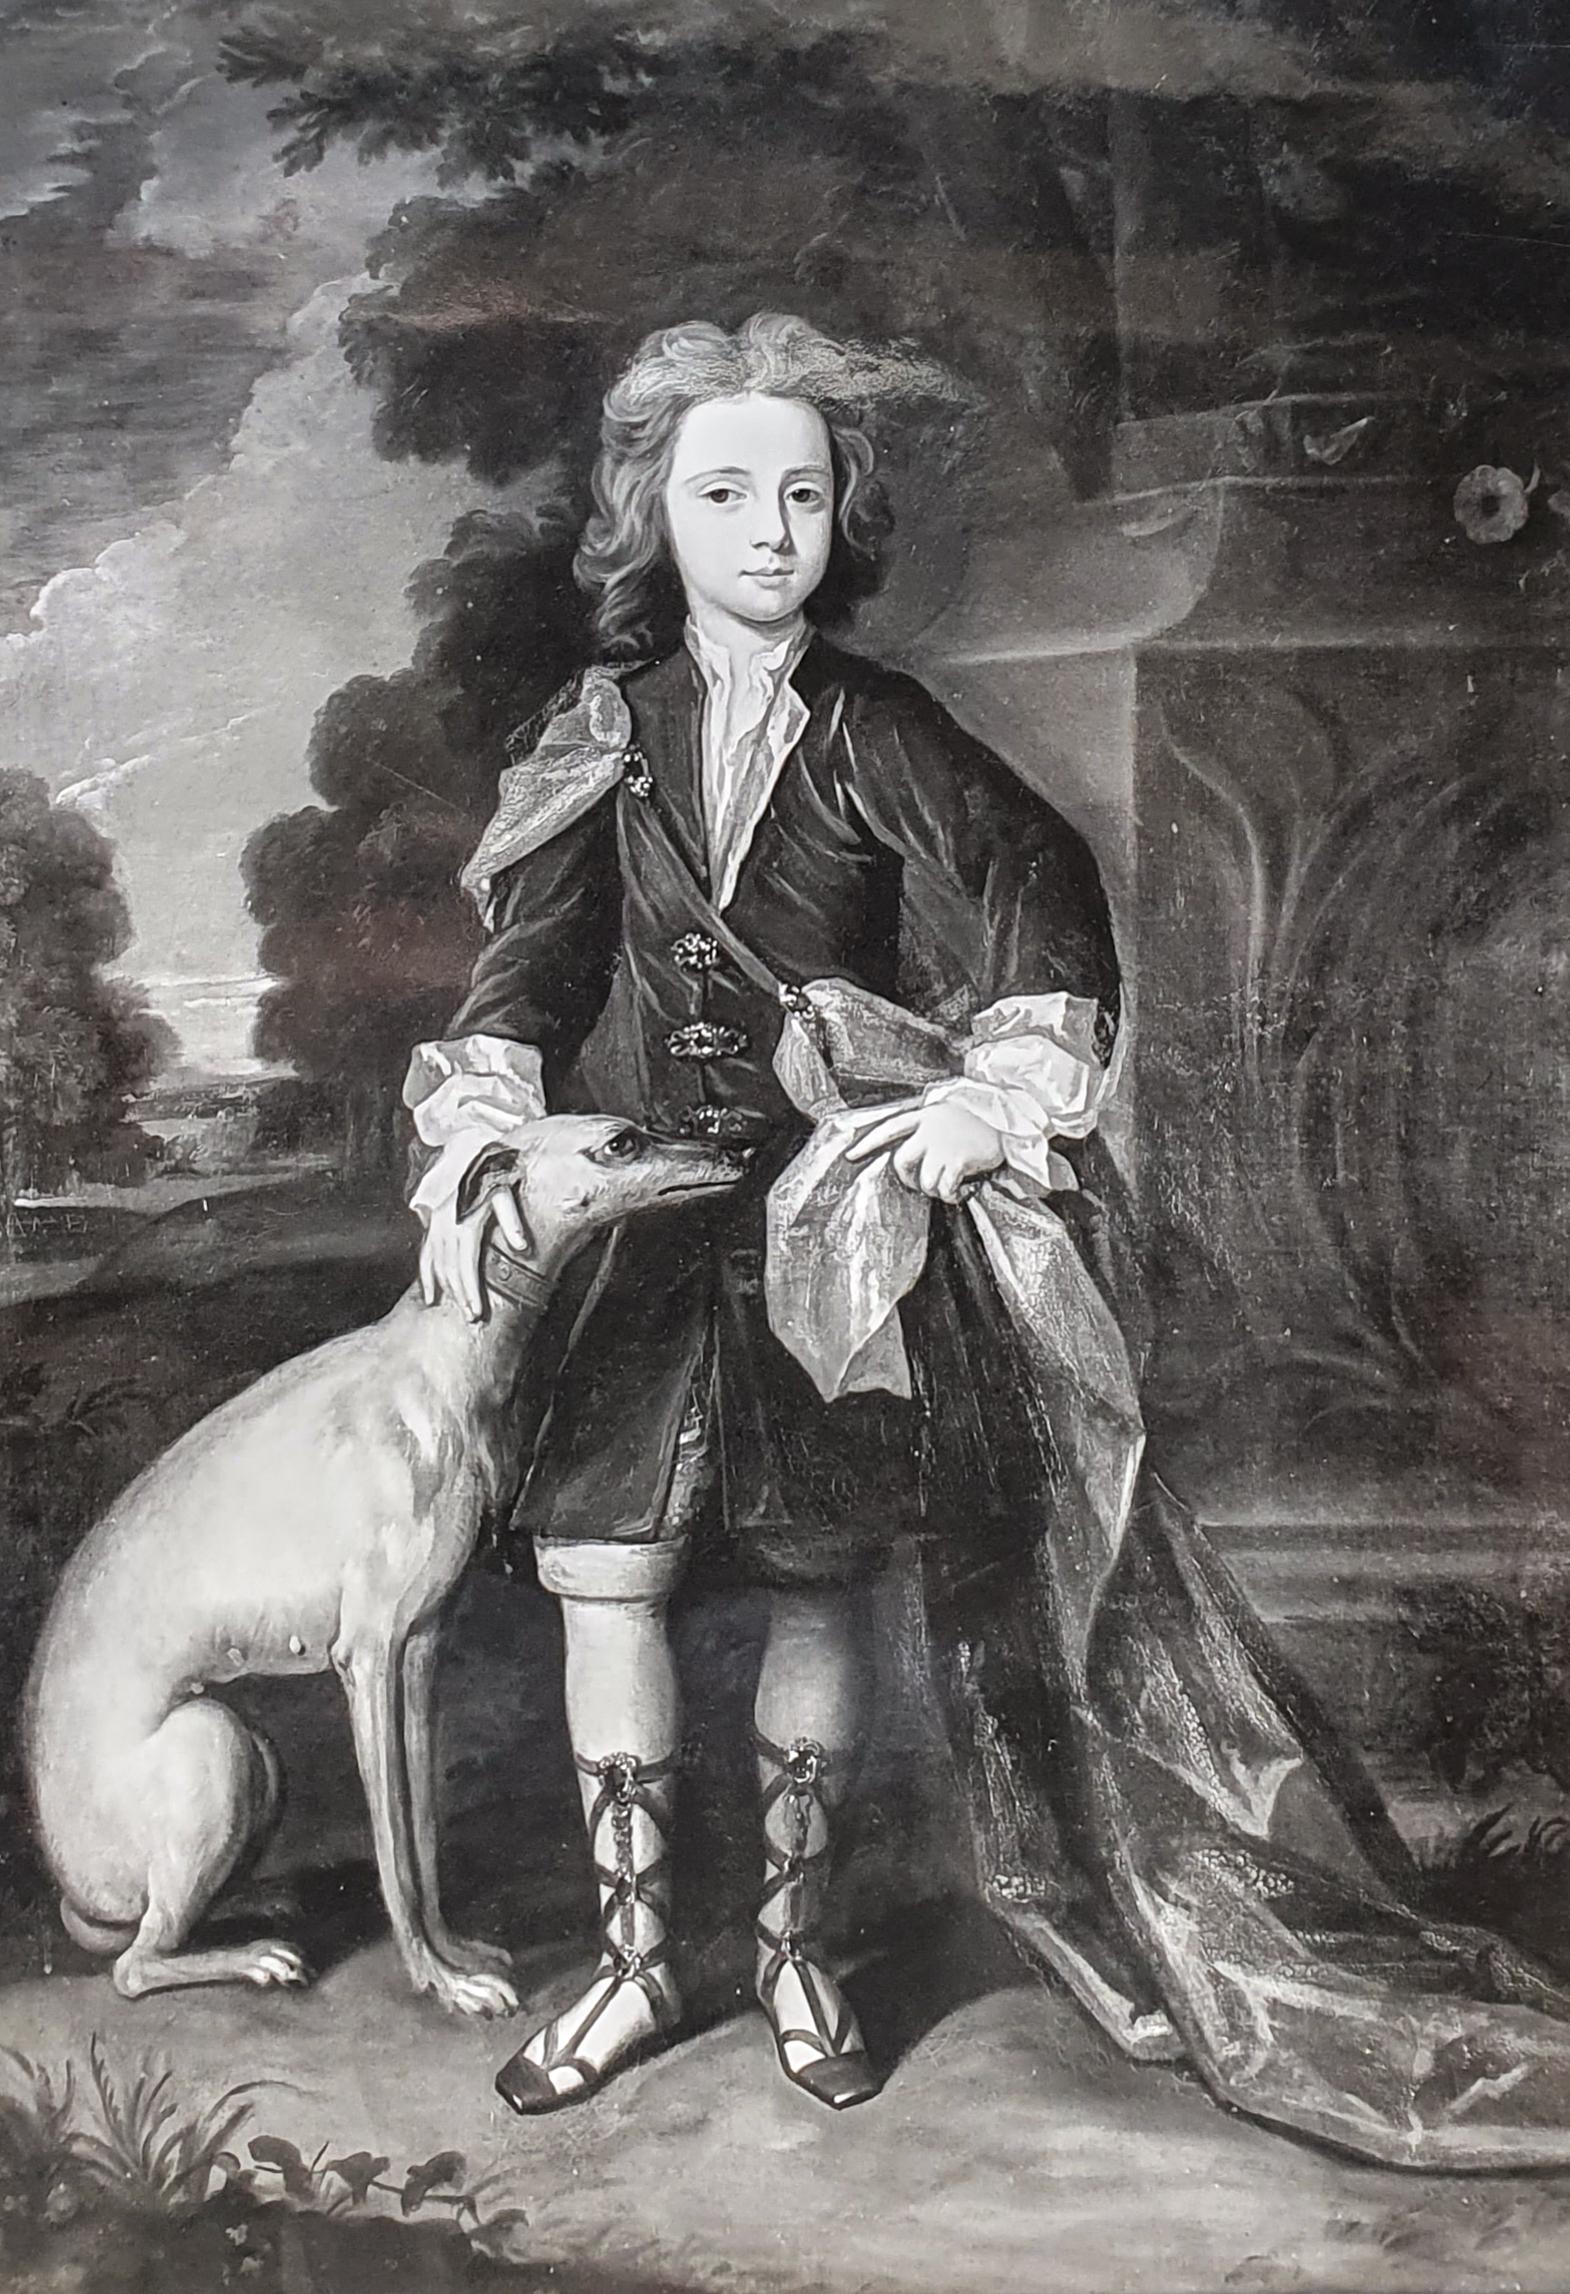 Portrait of Young Gentleman, Lord George Douglas, in an Arcadian Landscape c.1710
Attributed to Charles D'Agar (1669-1723)

Depicted with bow in hand and situated against an Arcadian backdrop this young gentleman represents a fine example of